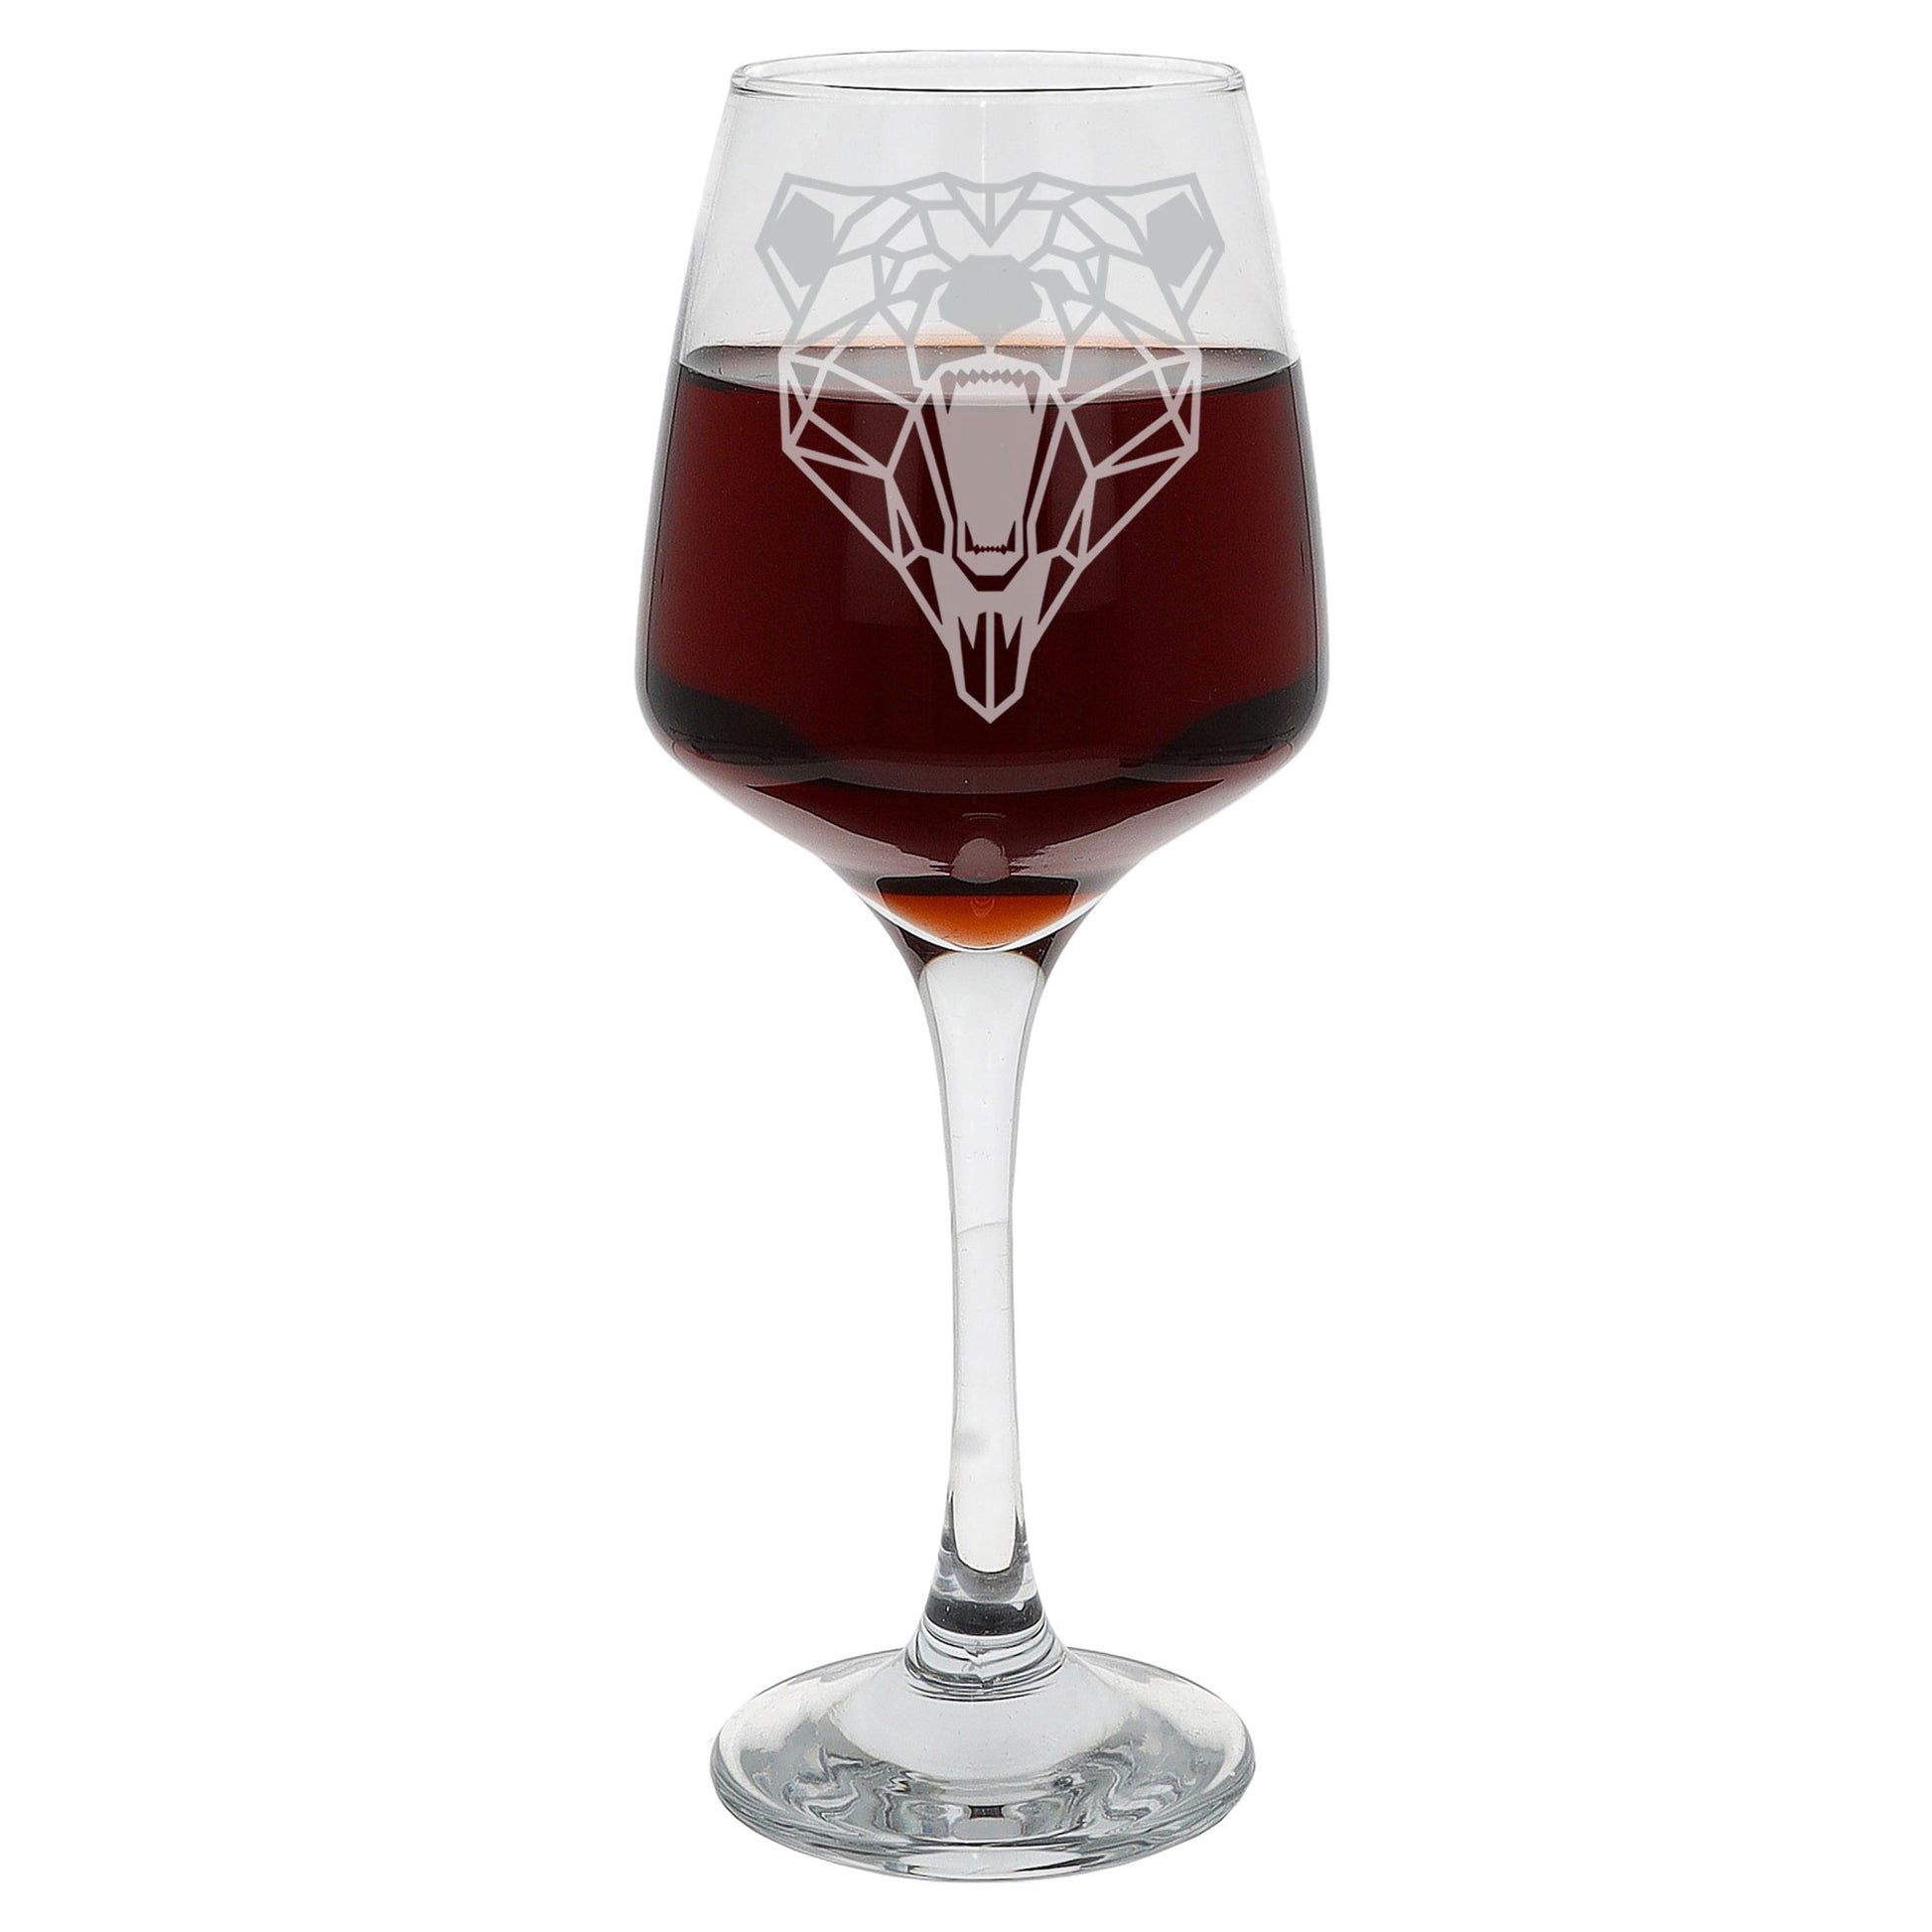 Grizzly Bear Engraved Wine Glass  - Always Looking Good -   